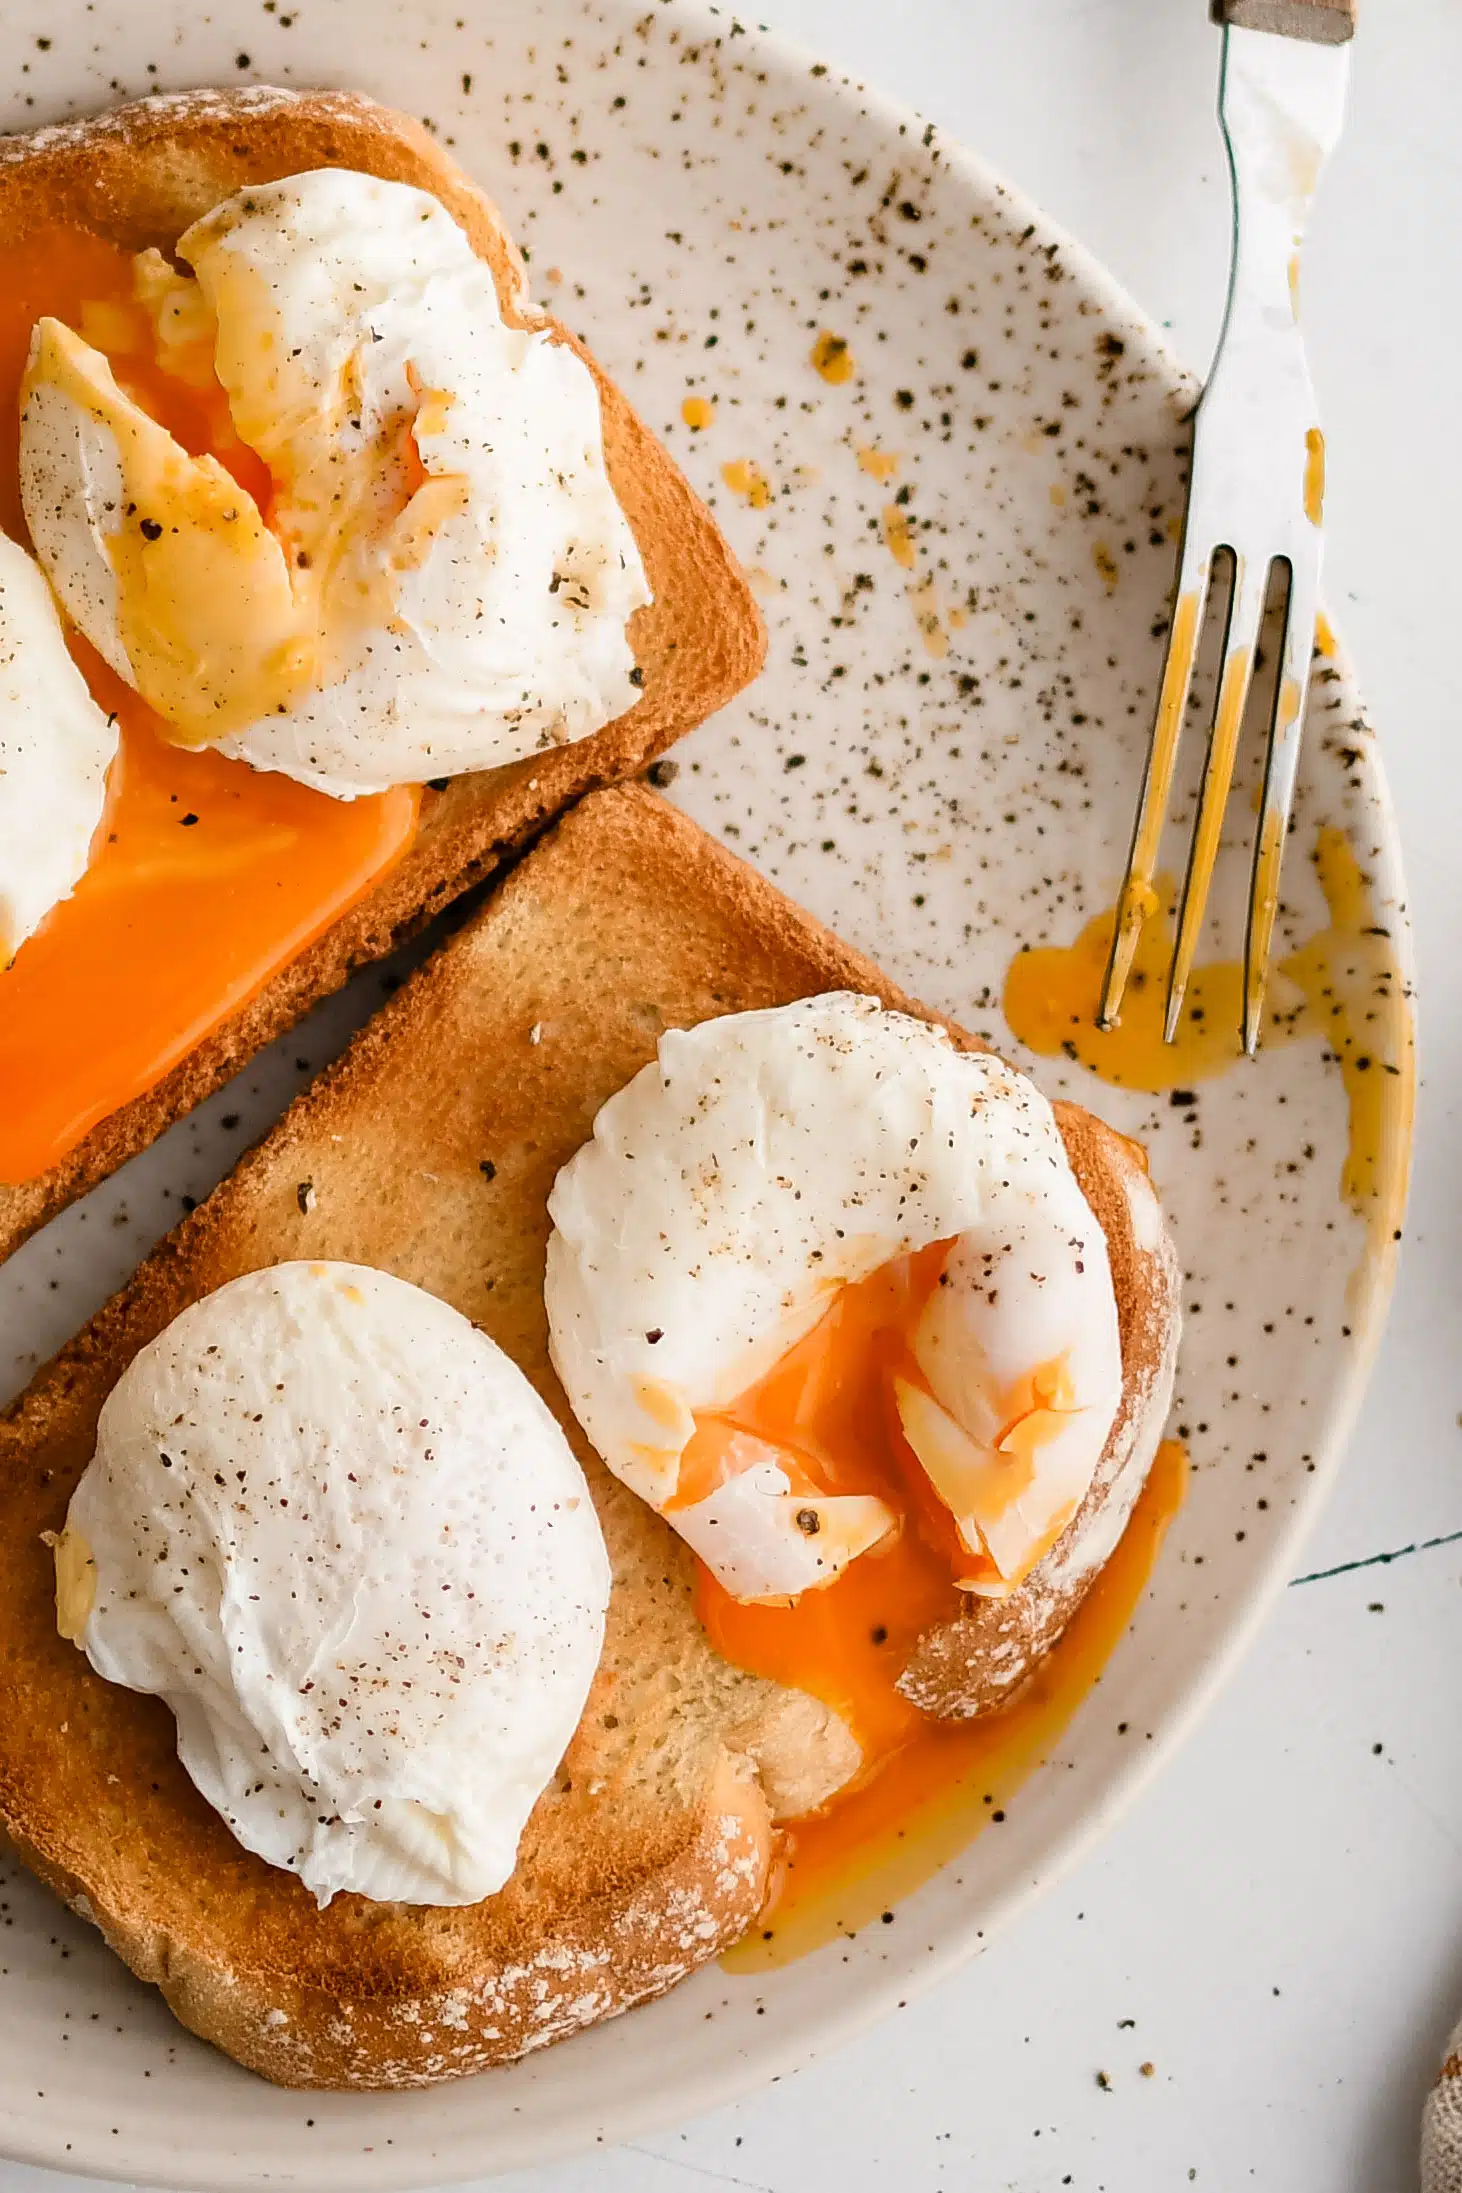 Sliced open poached eggs on toasted bread with runny yolk dripping onto the toast and seasoned with black pepper.